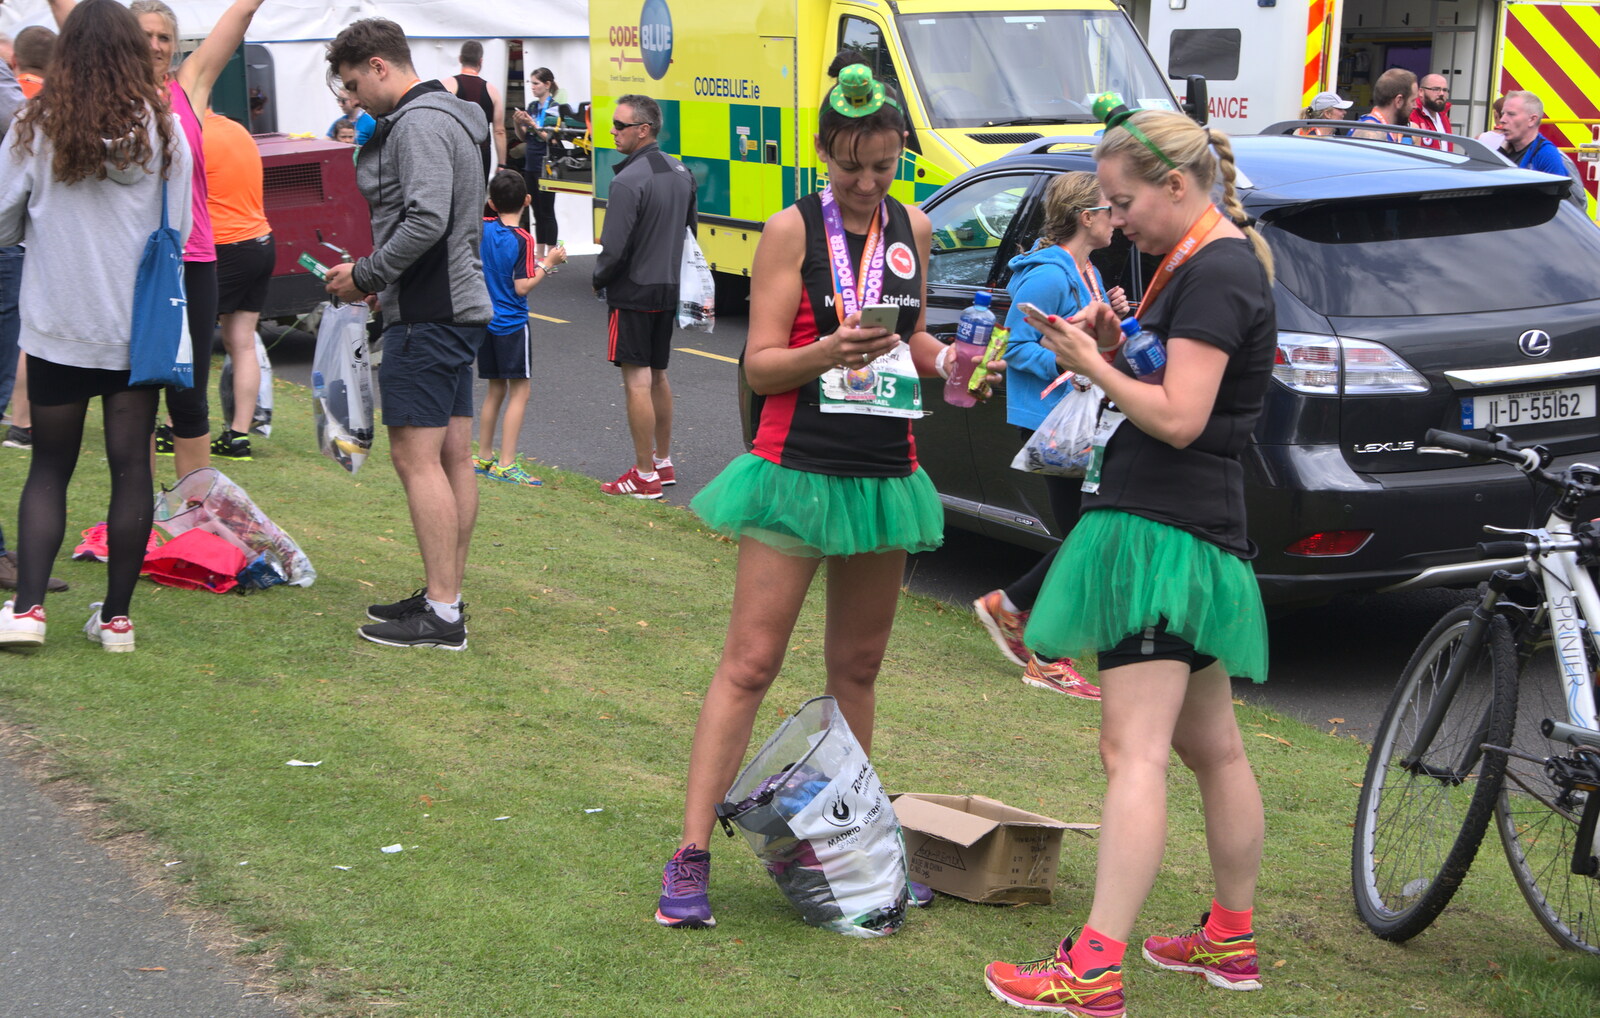 There are several tutus about from Isobel's Rock'n'Roll Half Marathon, Dublin, Ireland - 13th August 2017